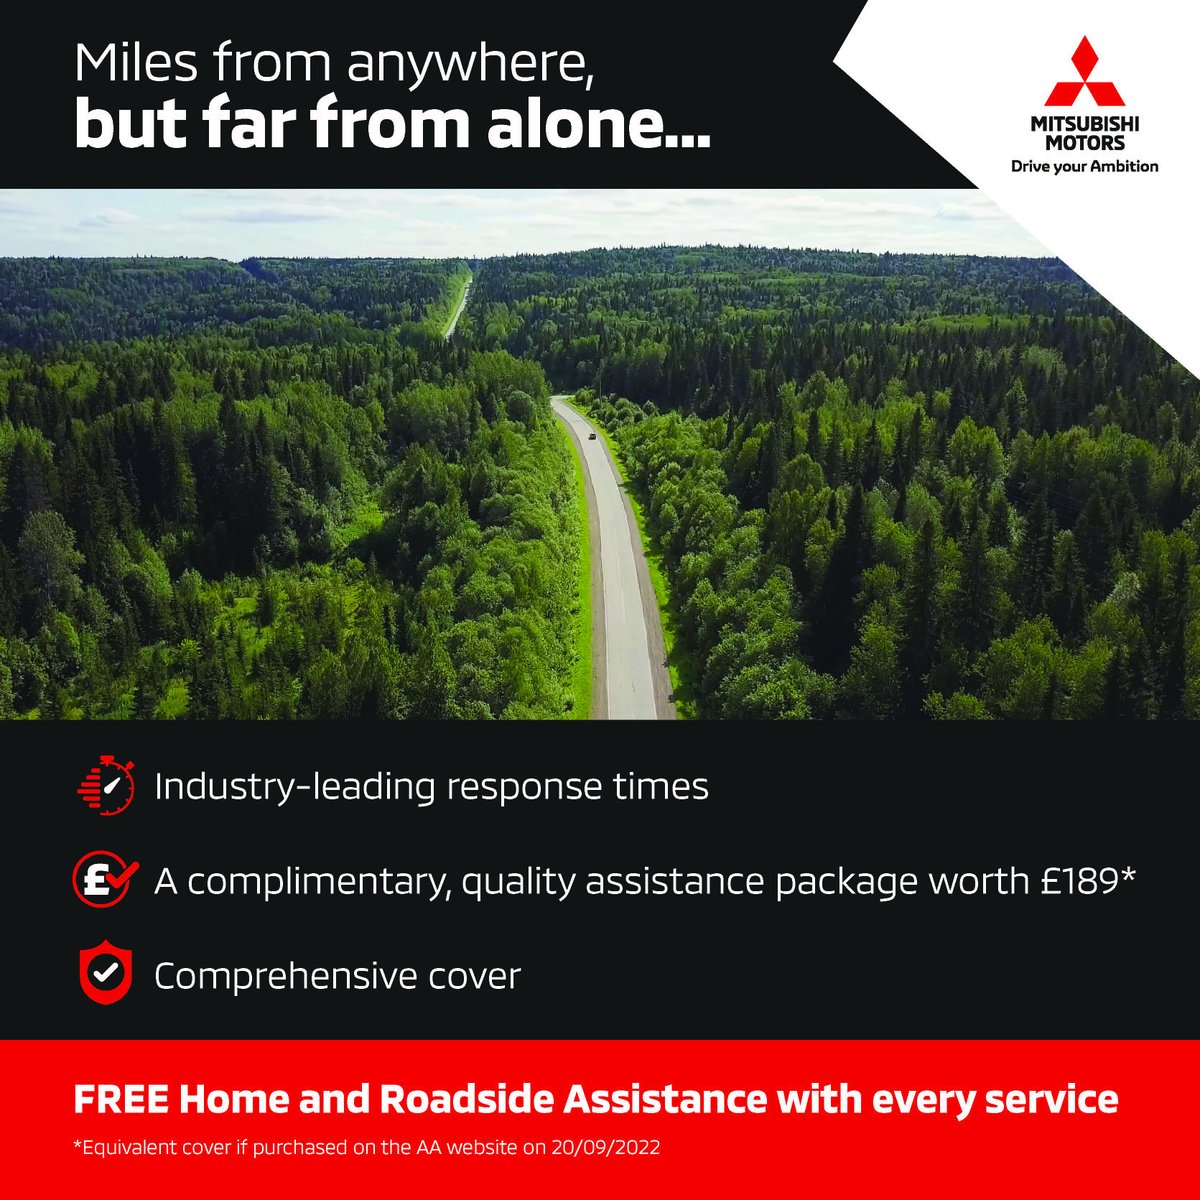 With Mitsubishi, you'll receive FREE home and roadside assistance with every service. Why go anywhere else? mitsubishi-motors.co.uk/roadside-assis… *At participating Servicing Centres only #Mitsubishi #MitsubishiMotors #MitsubishiMotorsUK